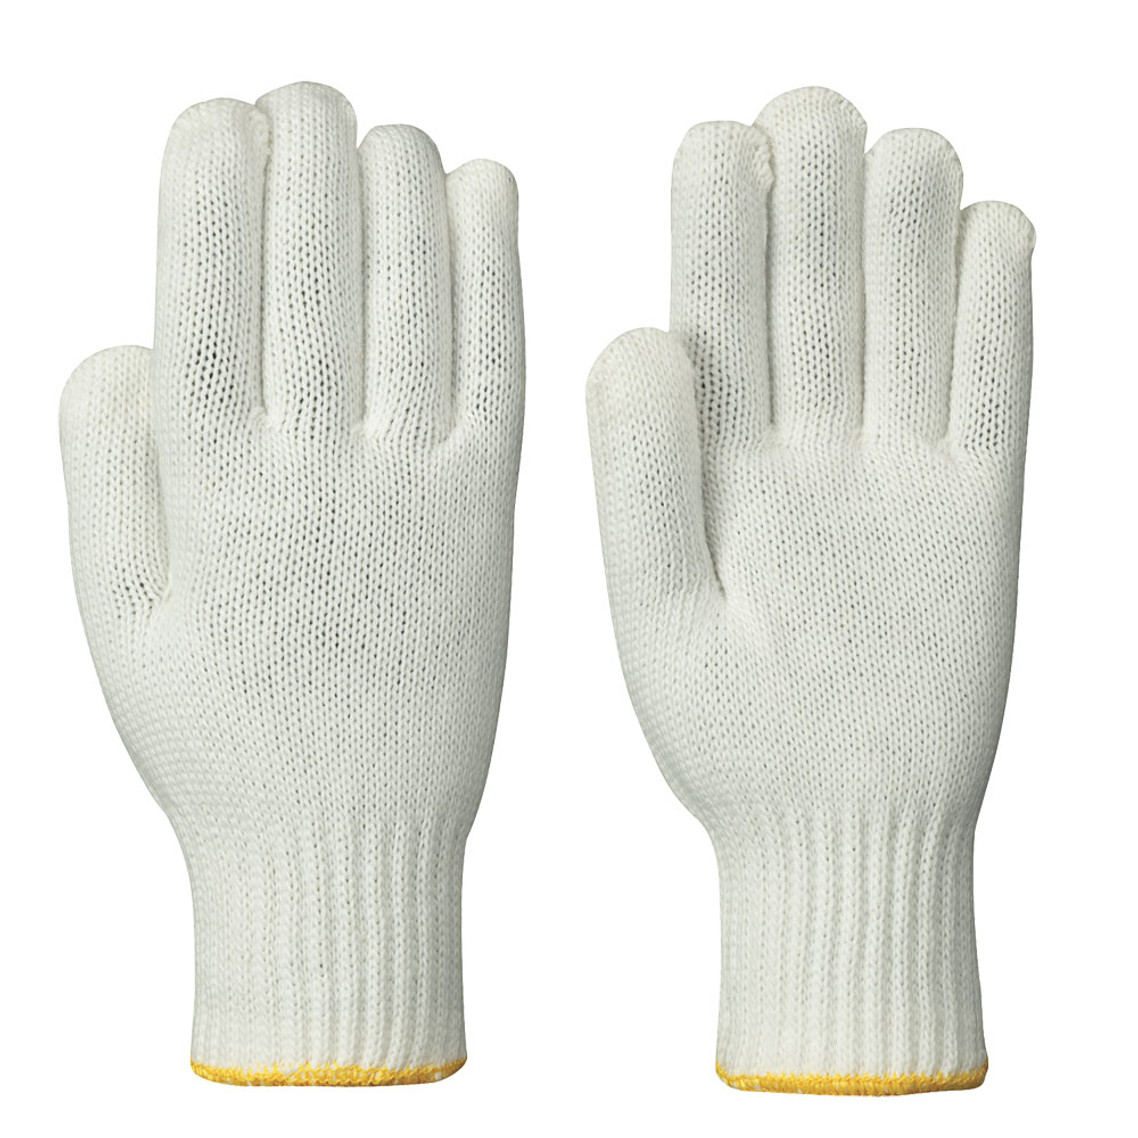 Pioneer 586 Nylon Knit Gloves (Pack of 12) | SafetyWear.ca